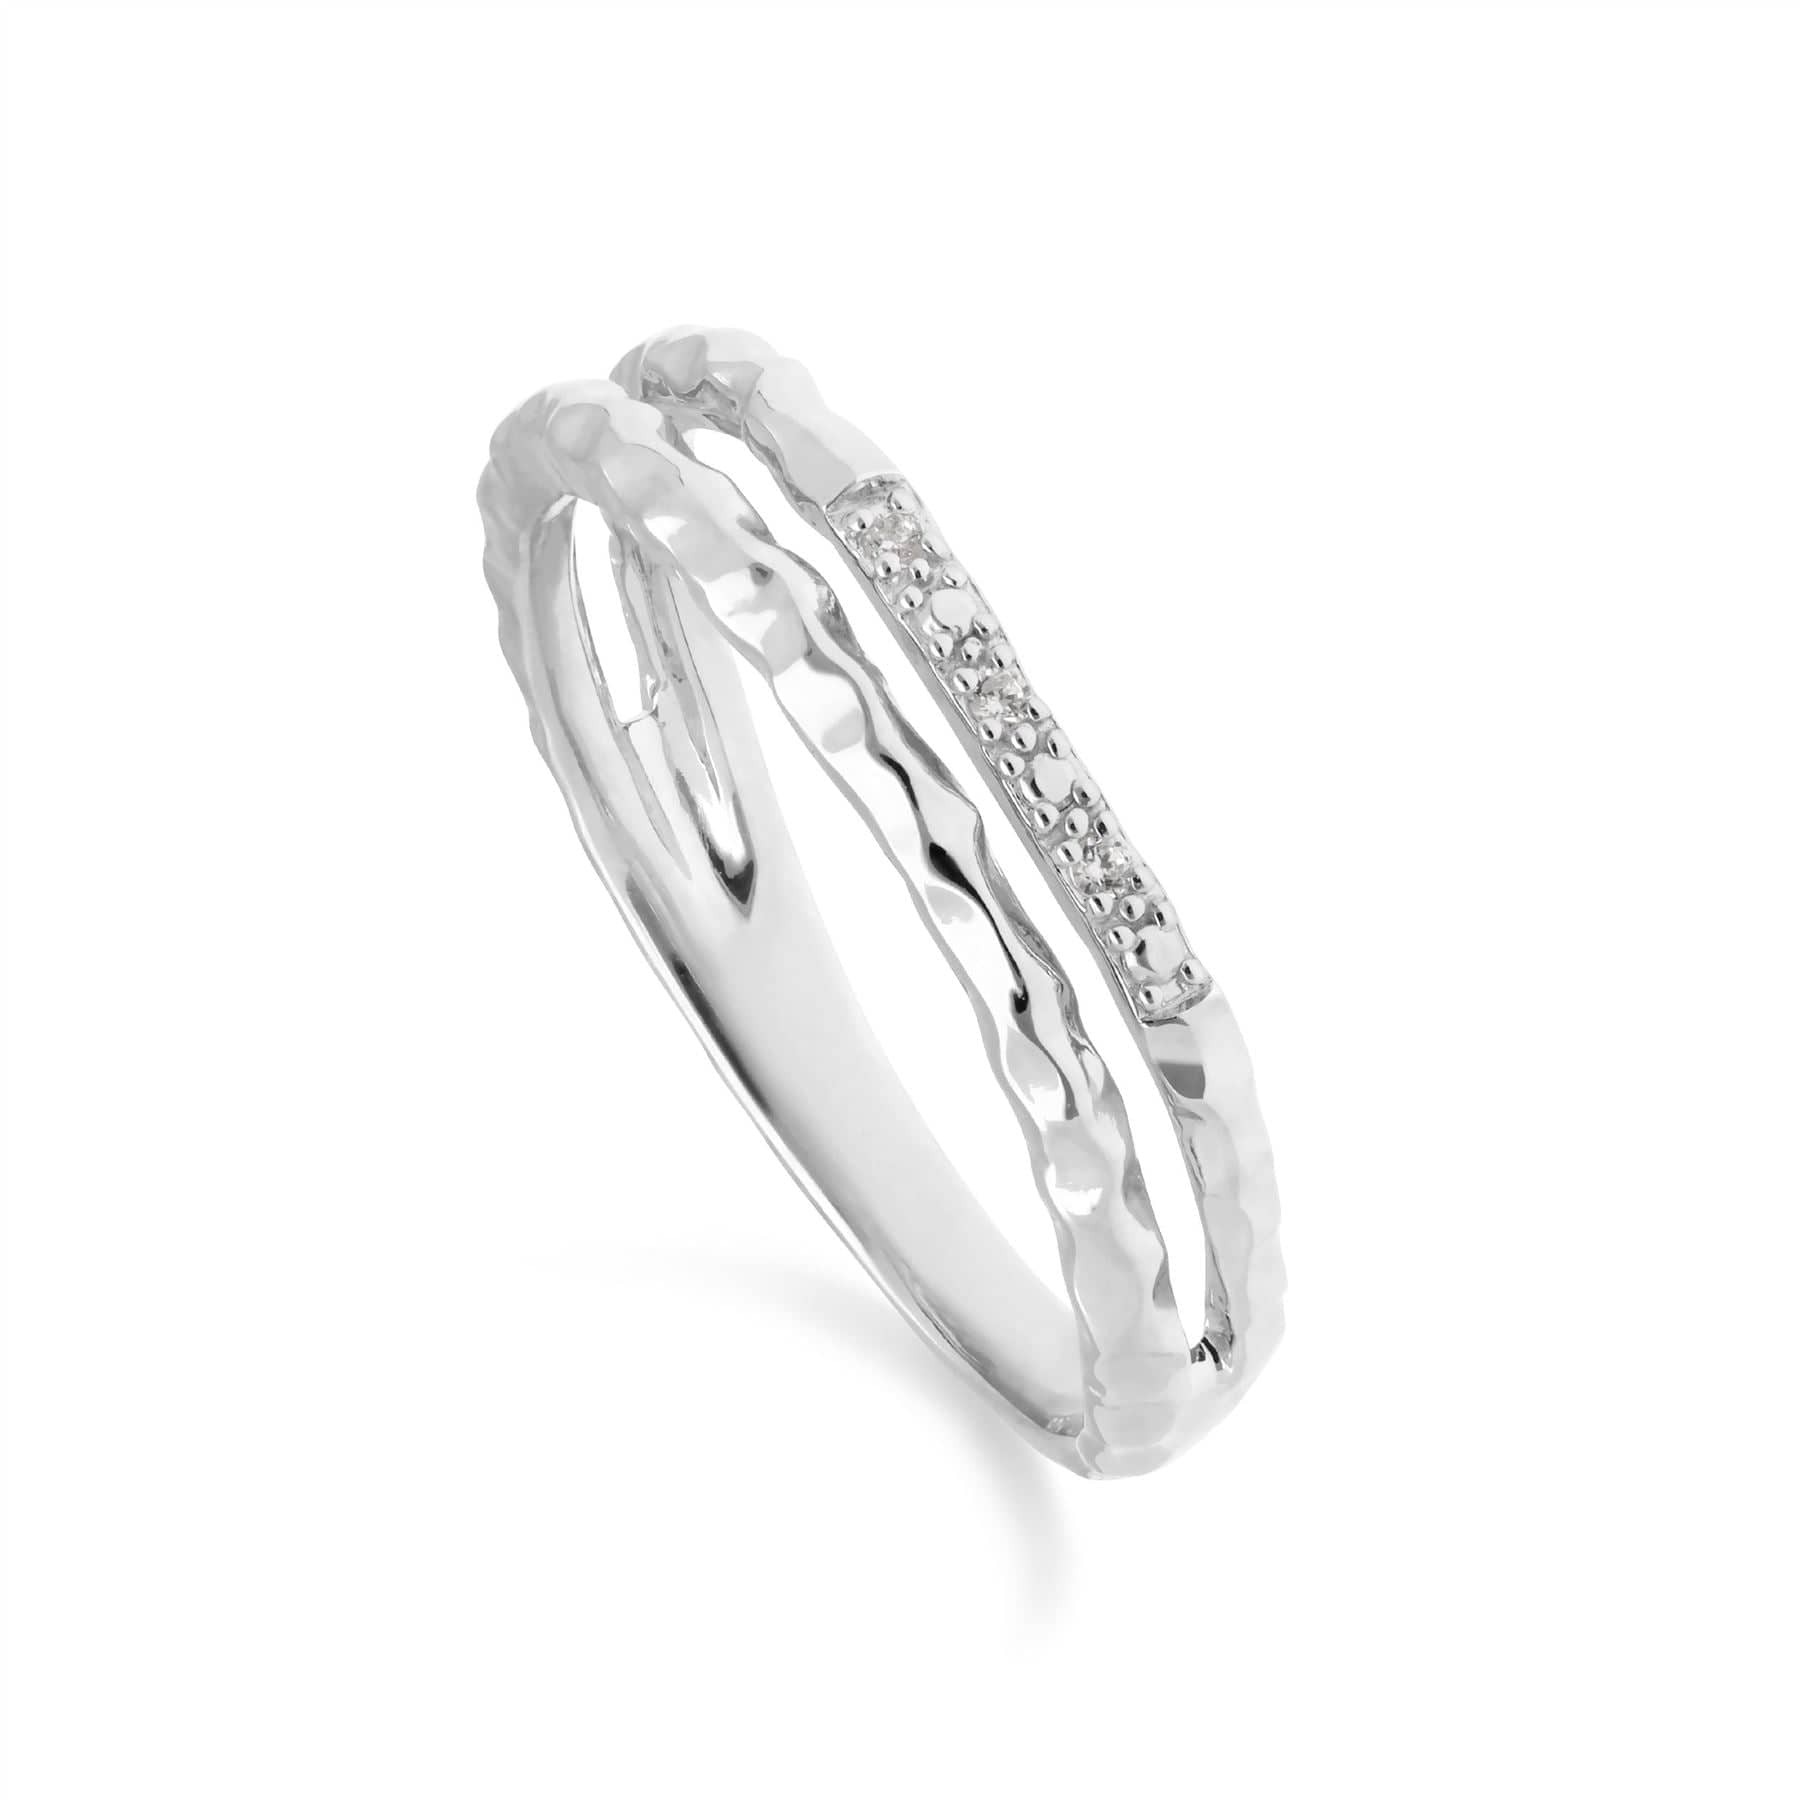 Image of Diamond Pav?? Hammered Double Band Ring in 9ct White Gold